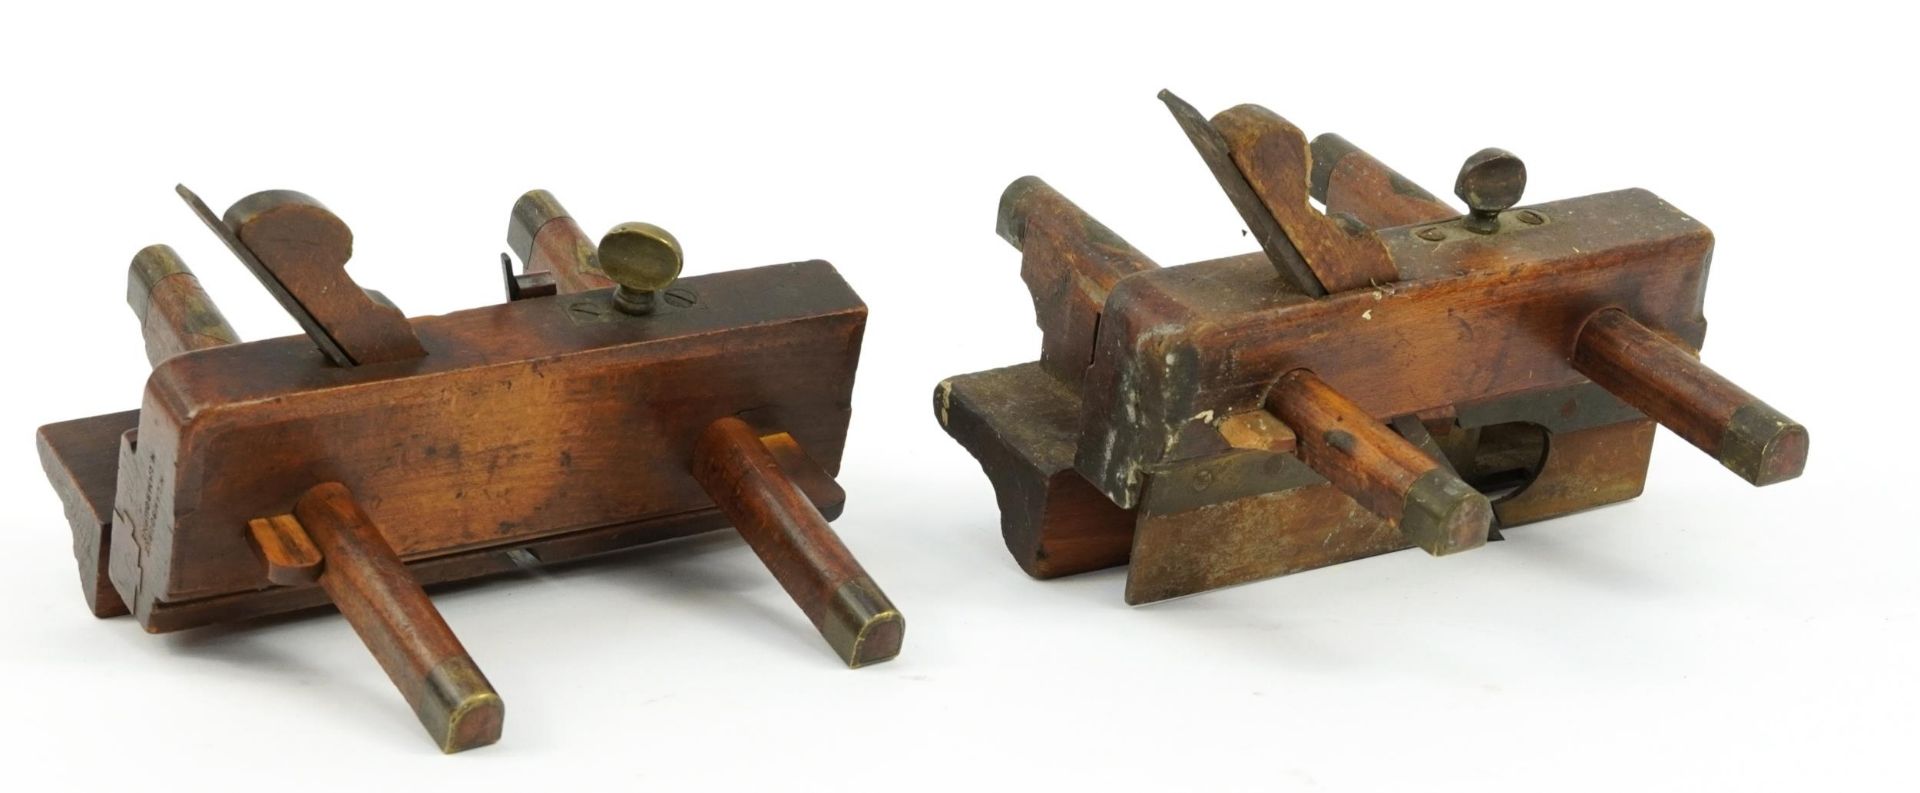 Two 19th century boxwood plough planes including John Moseley & Son and Marples & Son numbered 1943 - Image 2 of 4